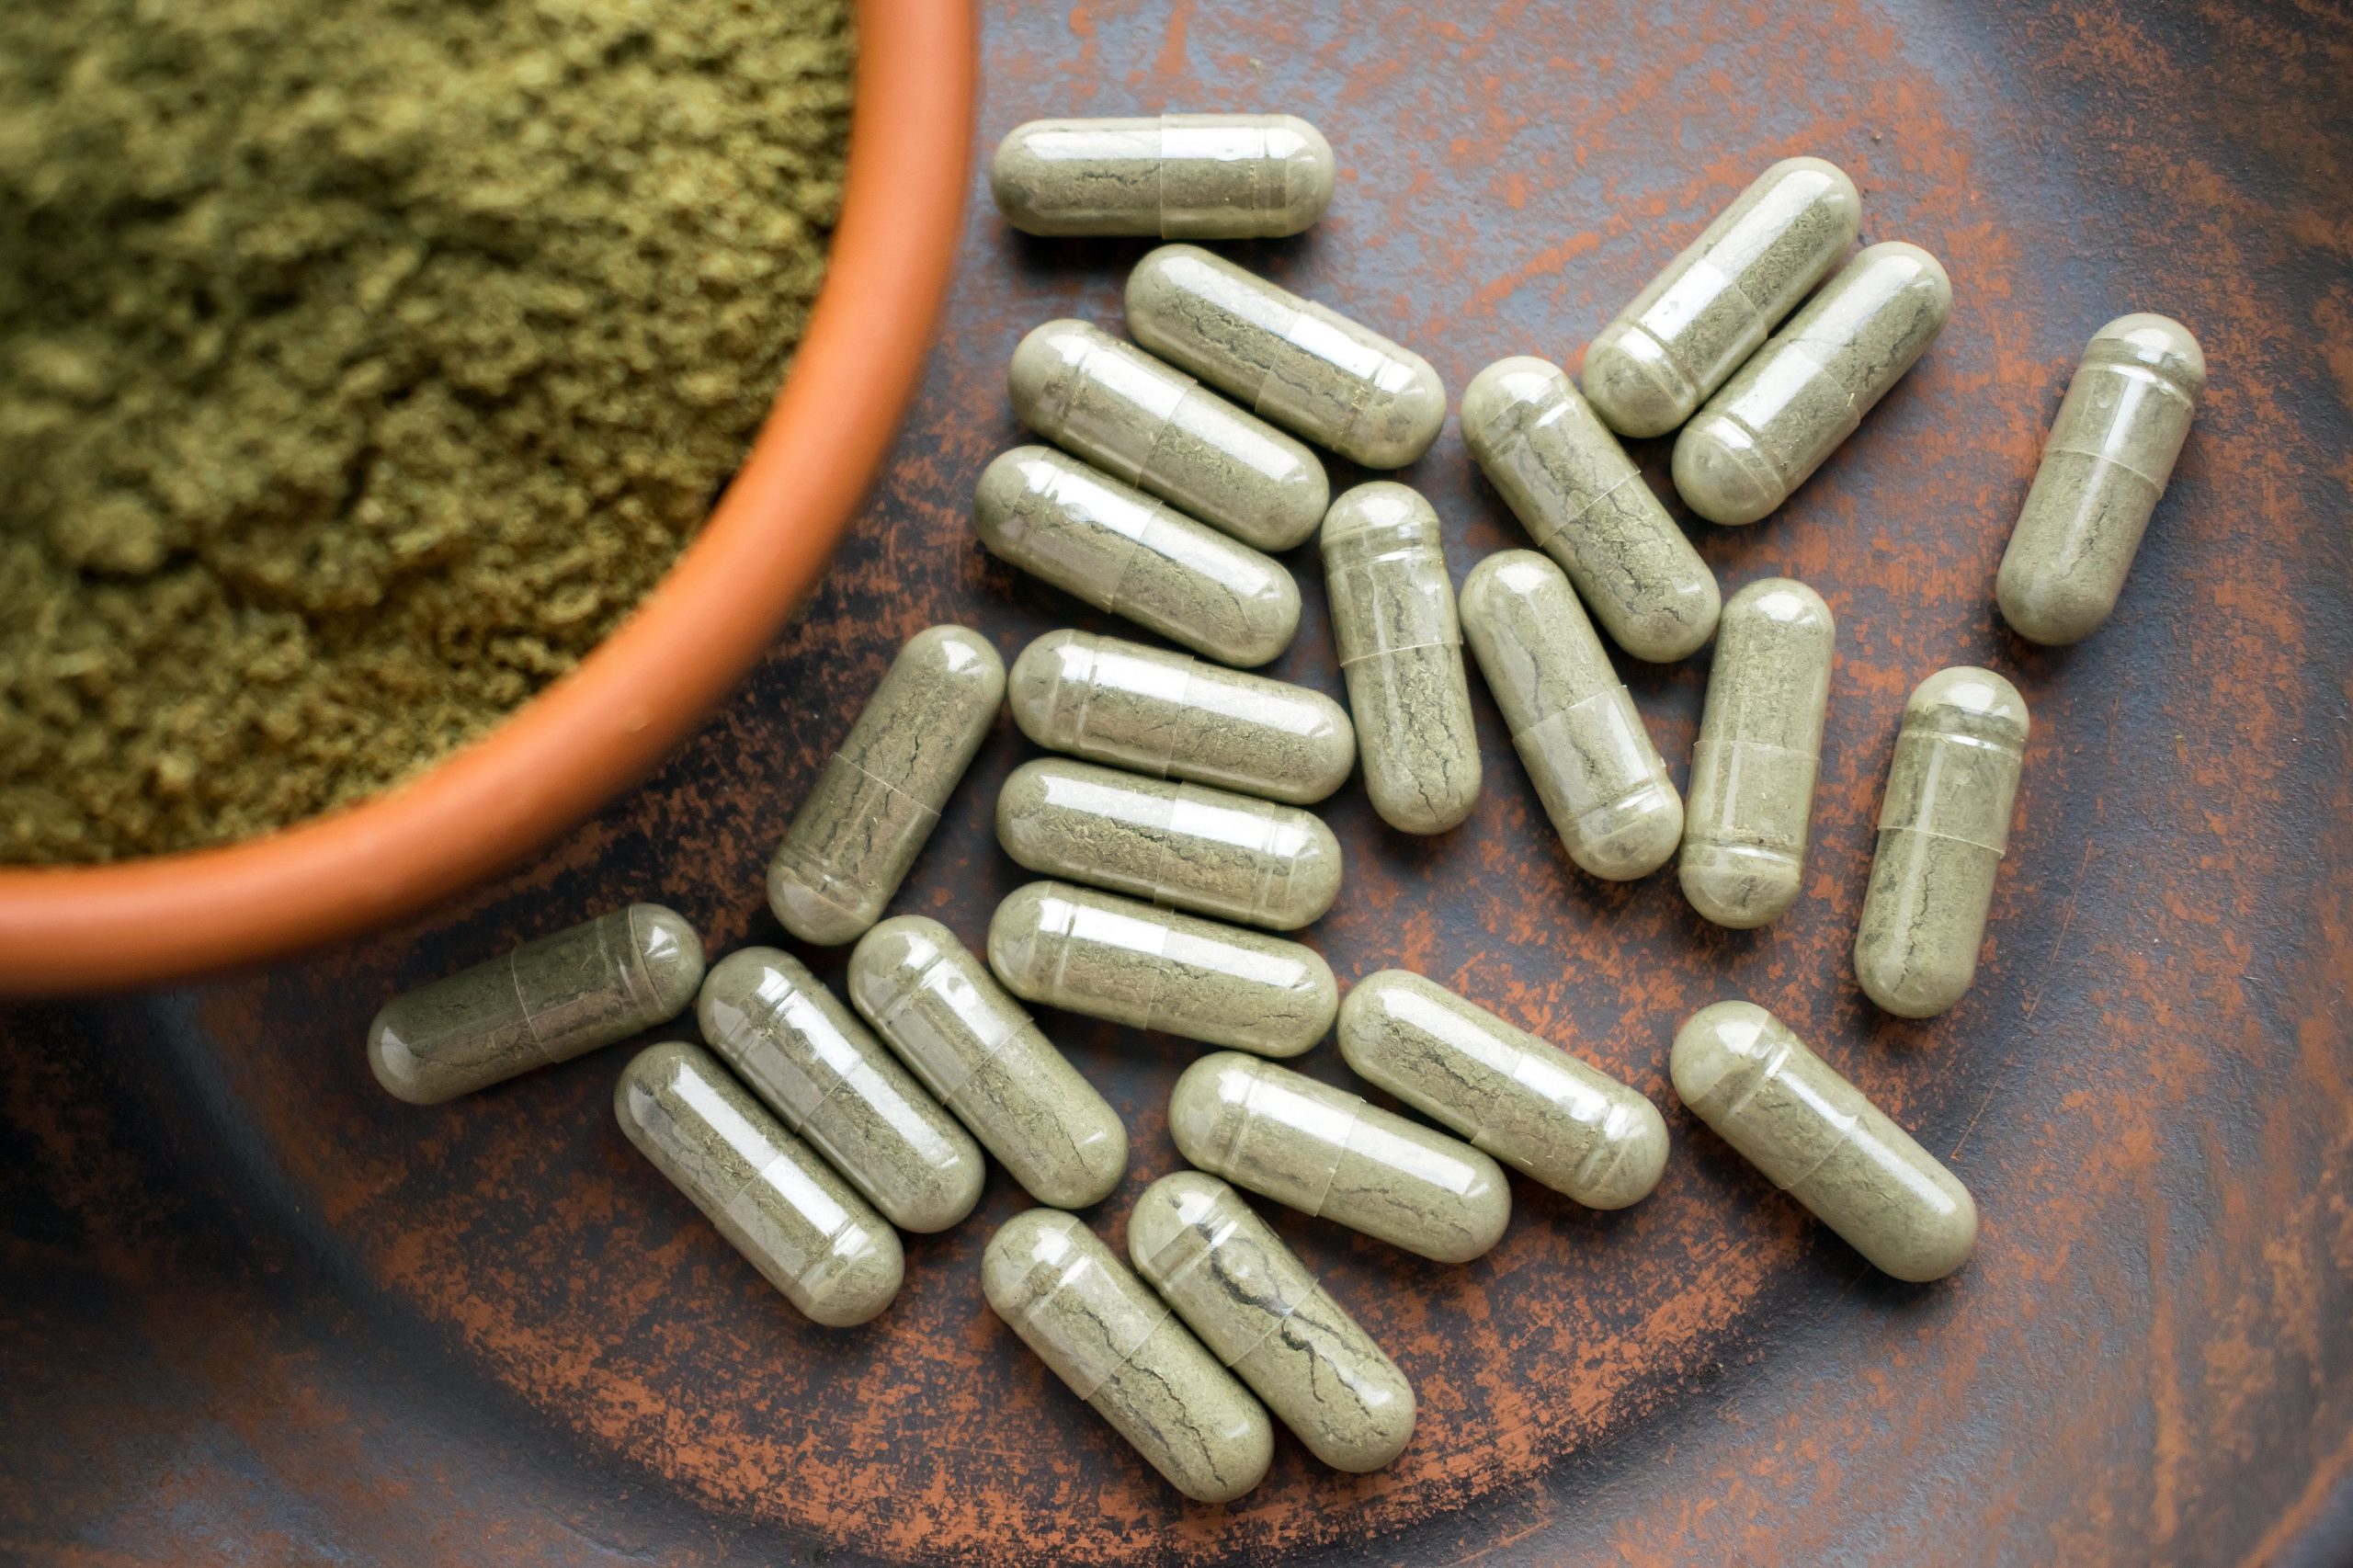 Kratom Use for Stress Release and Relaxation